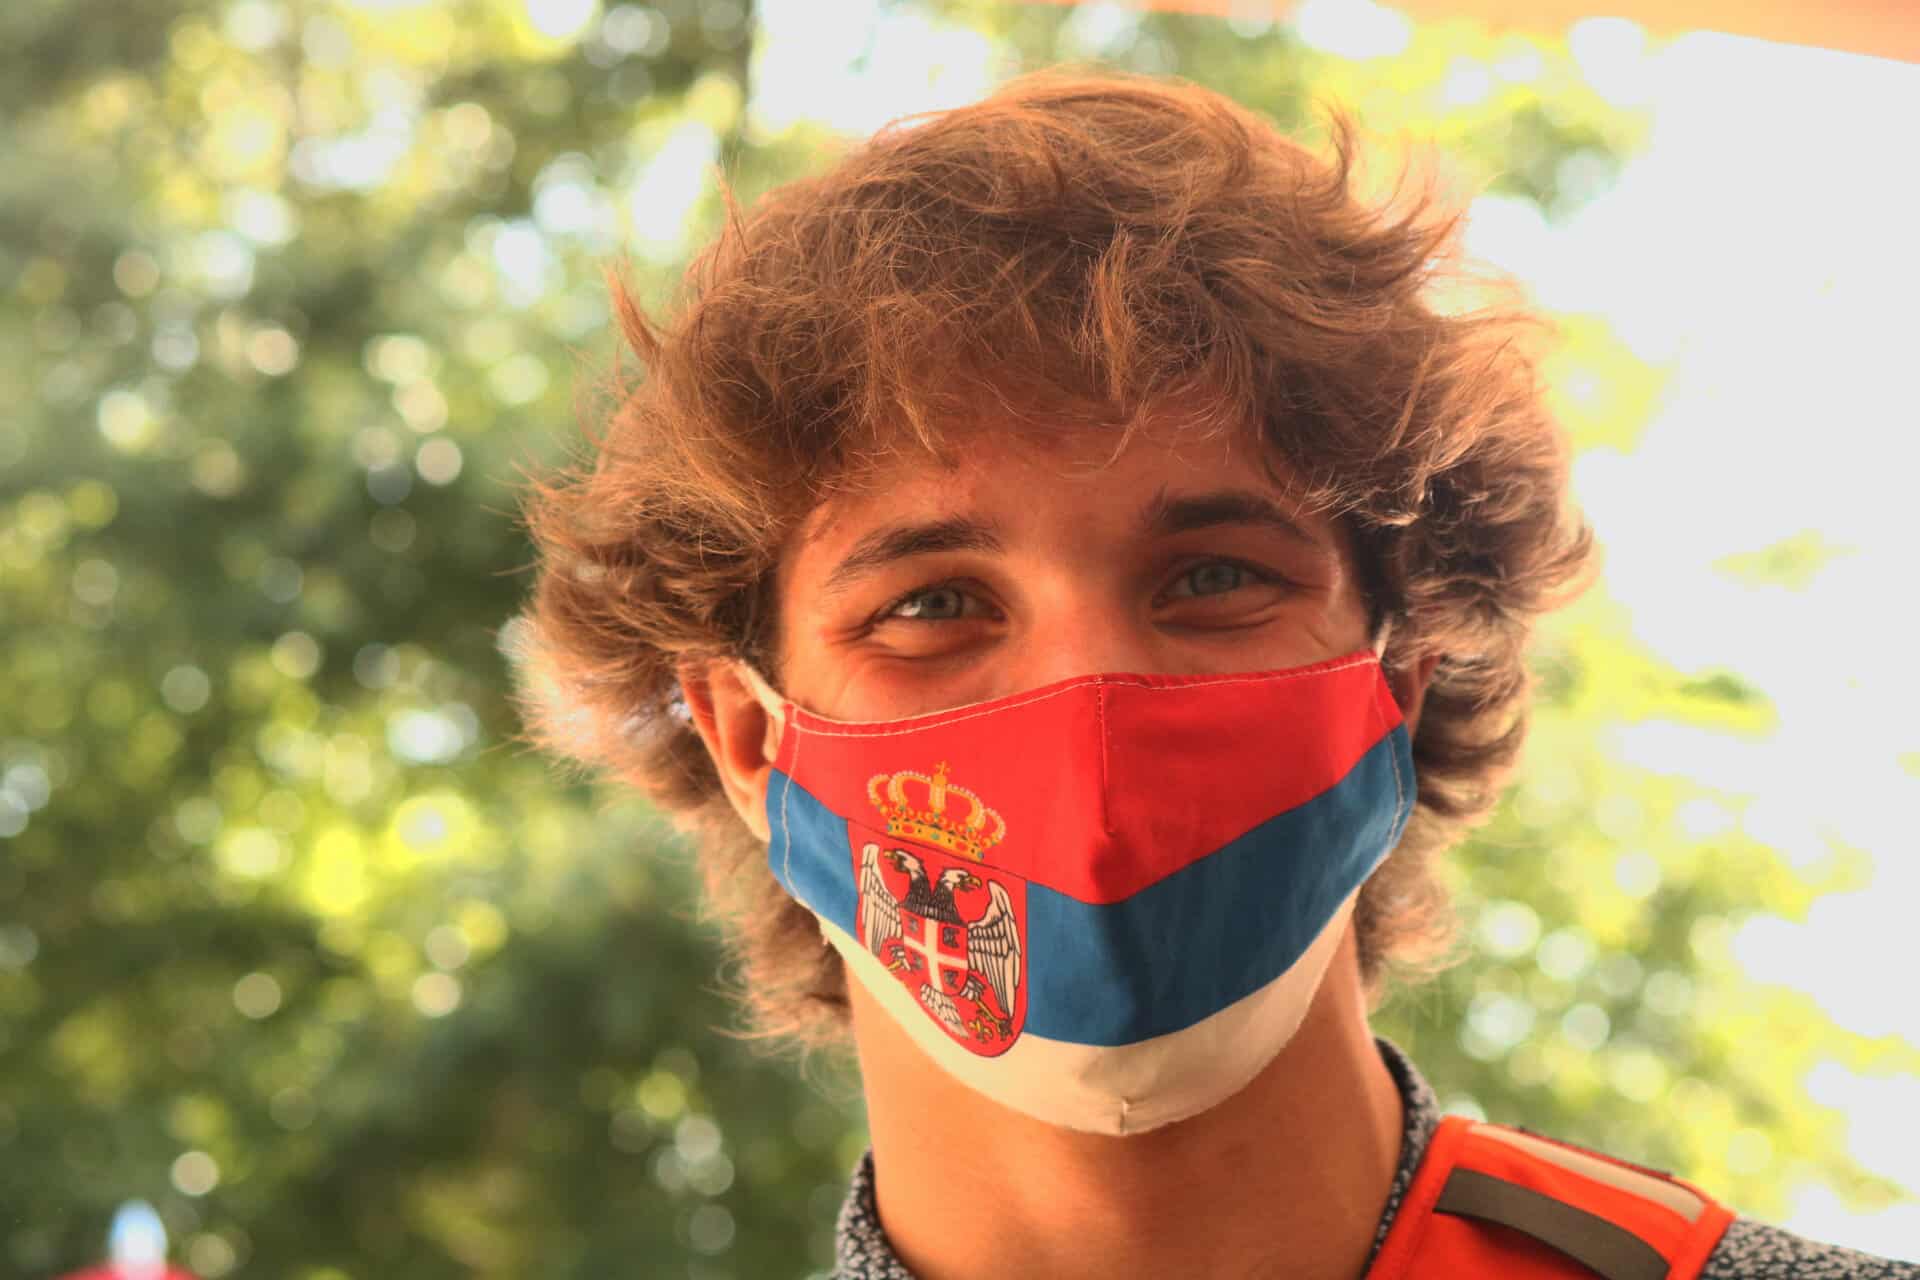 Dayne Hepner, freshman, is an International Business major. His mask is from Serbia where he grew up.